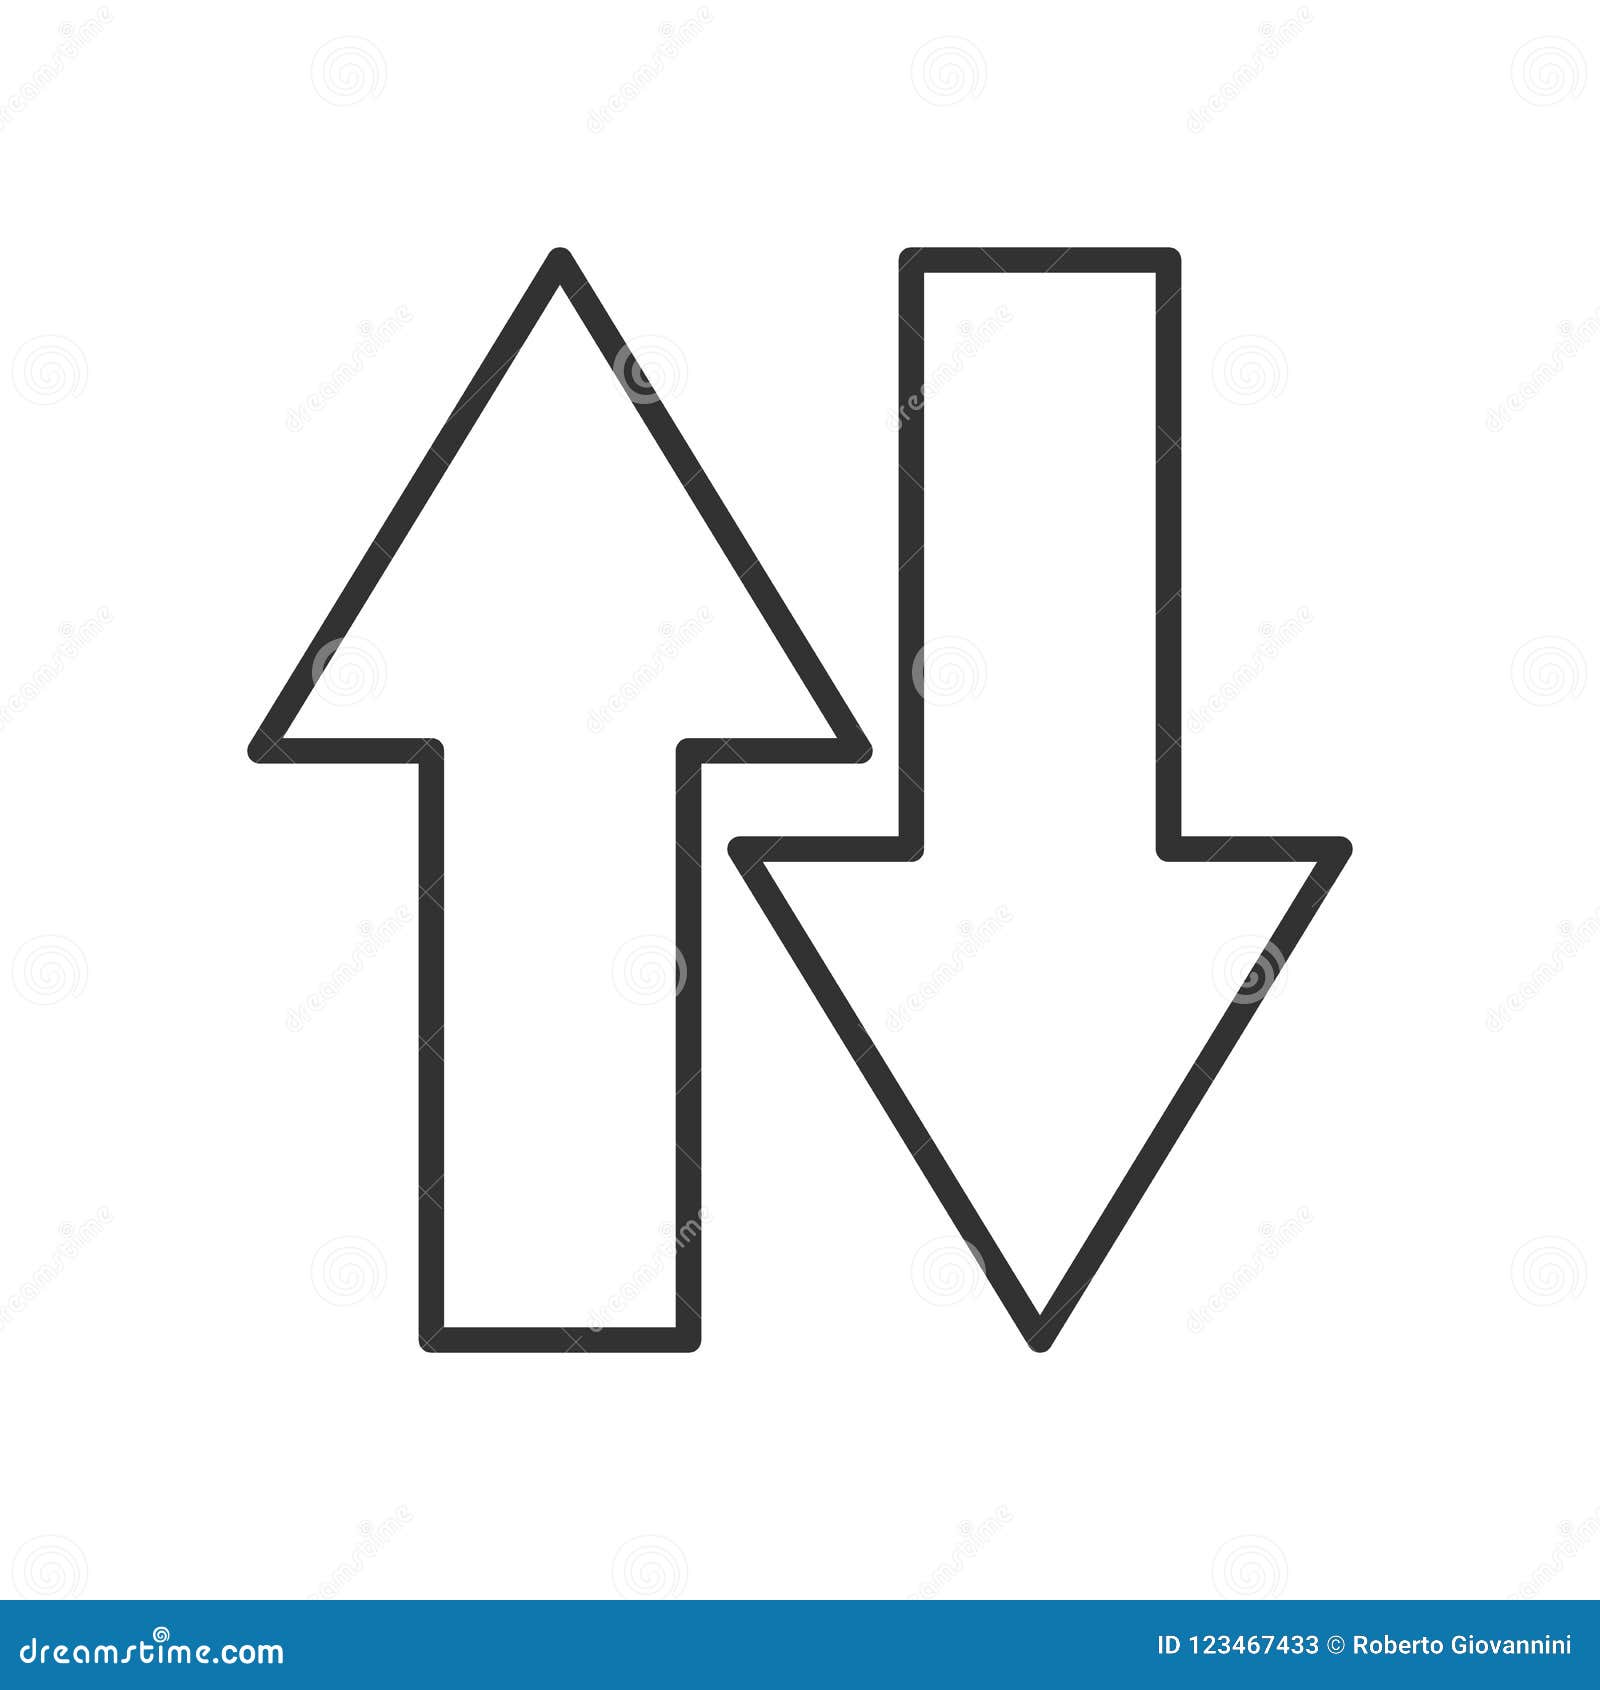 Up Down Arrows Outline Flat Icon On White Stock Vector Illustration Of Vector Arrows